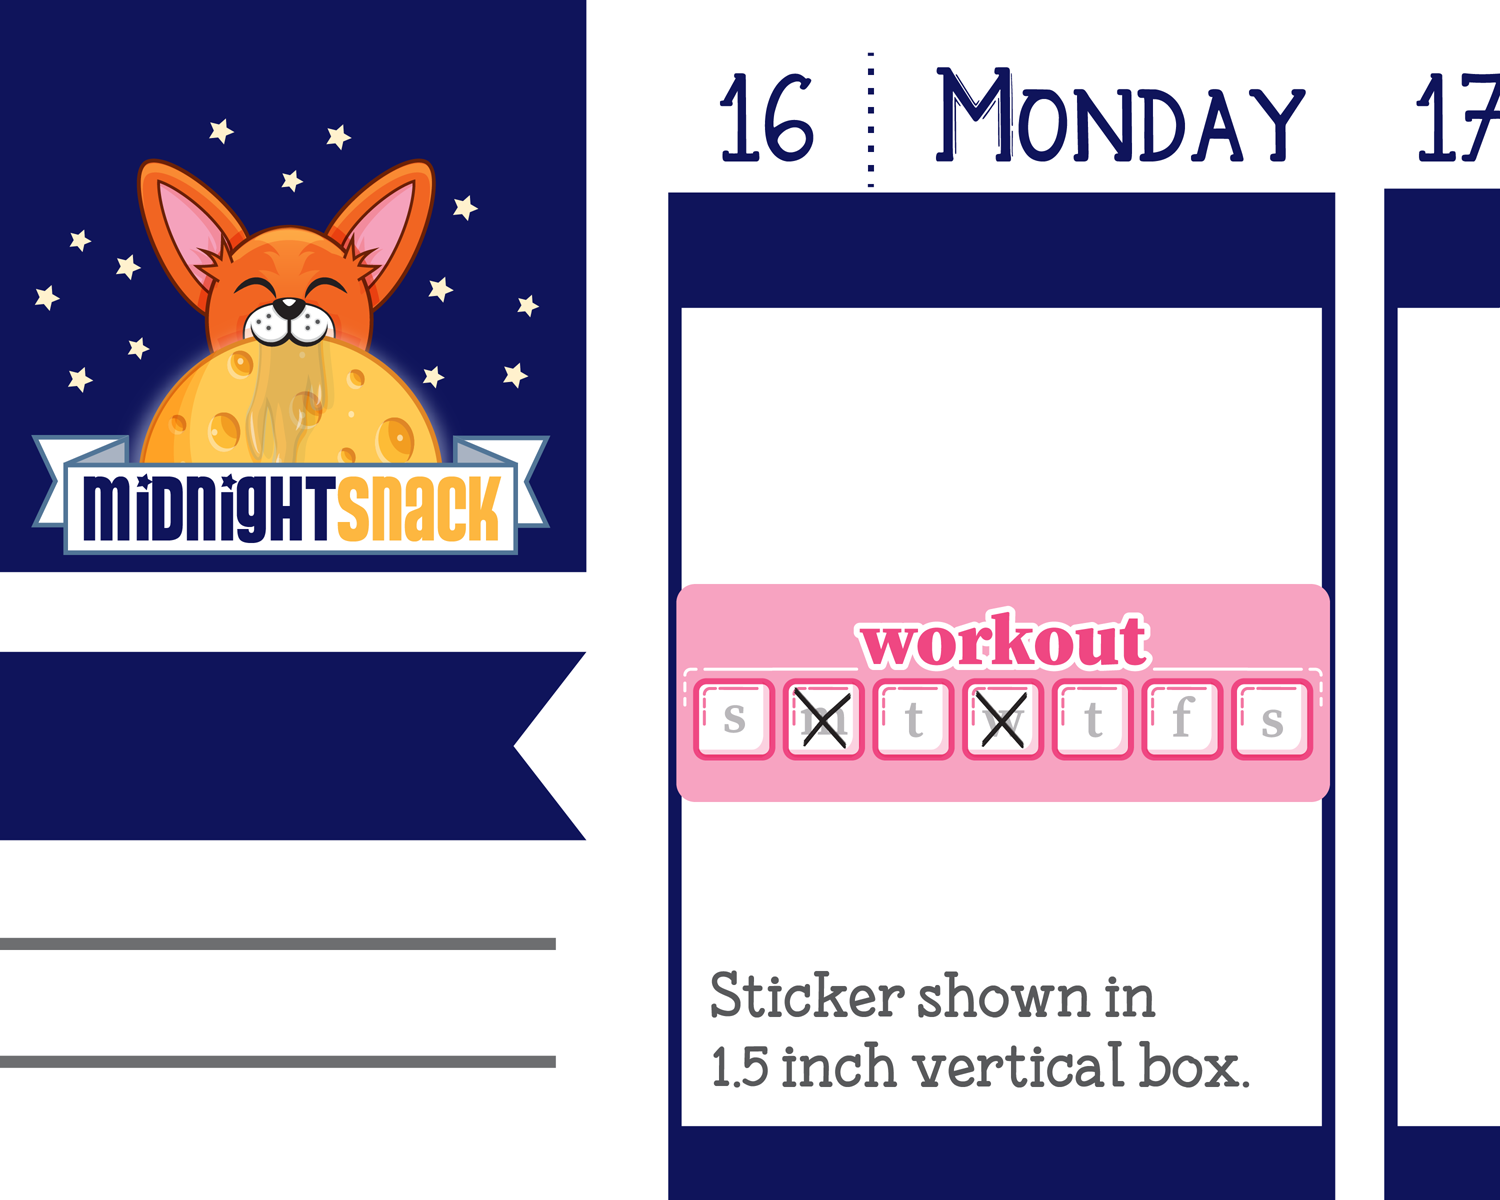 Workout Tracker: Fitness and Exercise Planner Stickers